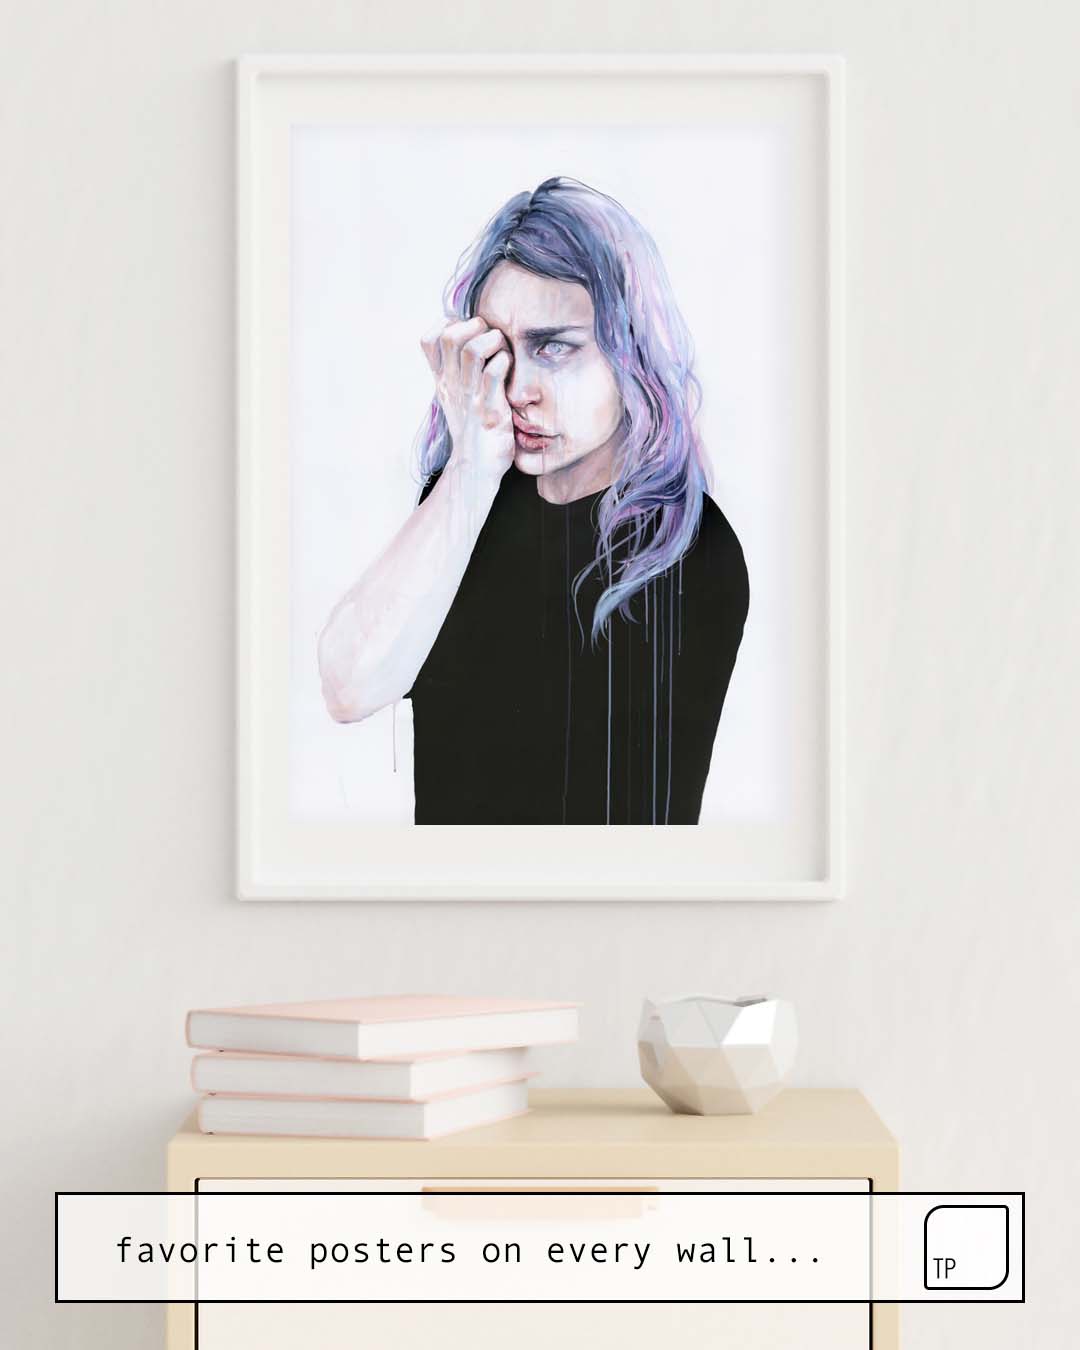 The photo shows an example of furnishing with the motif I COULD BUT I CAN'T by Agnes Cecile as mural